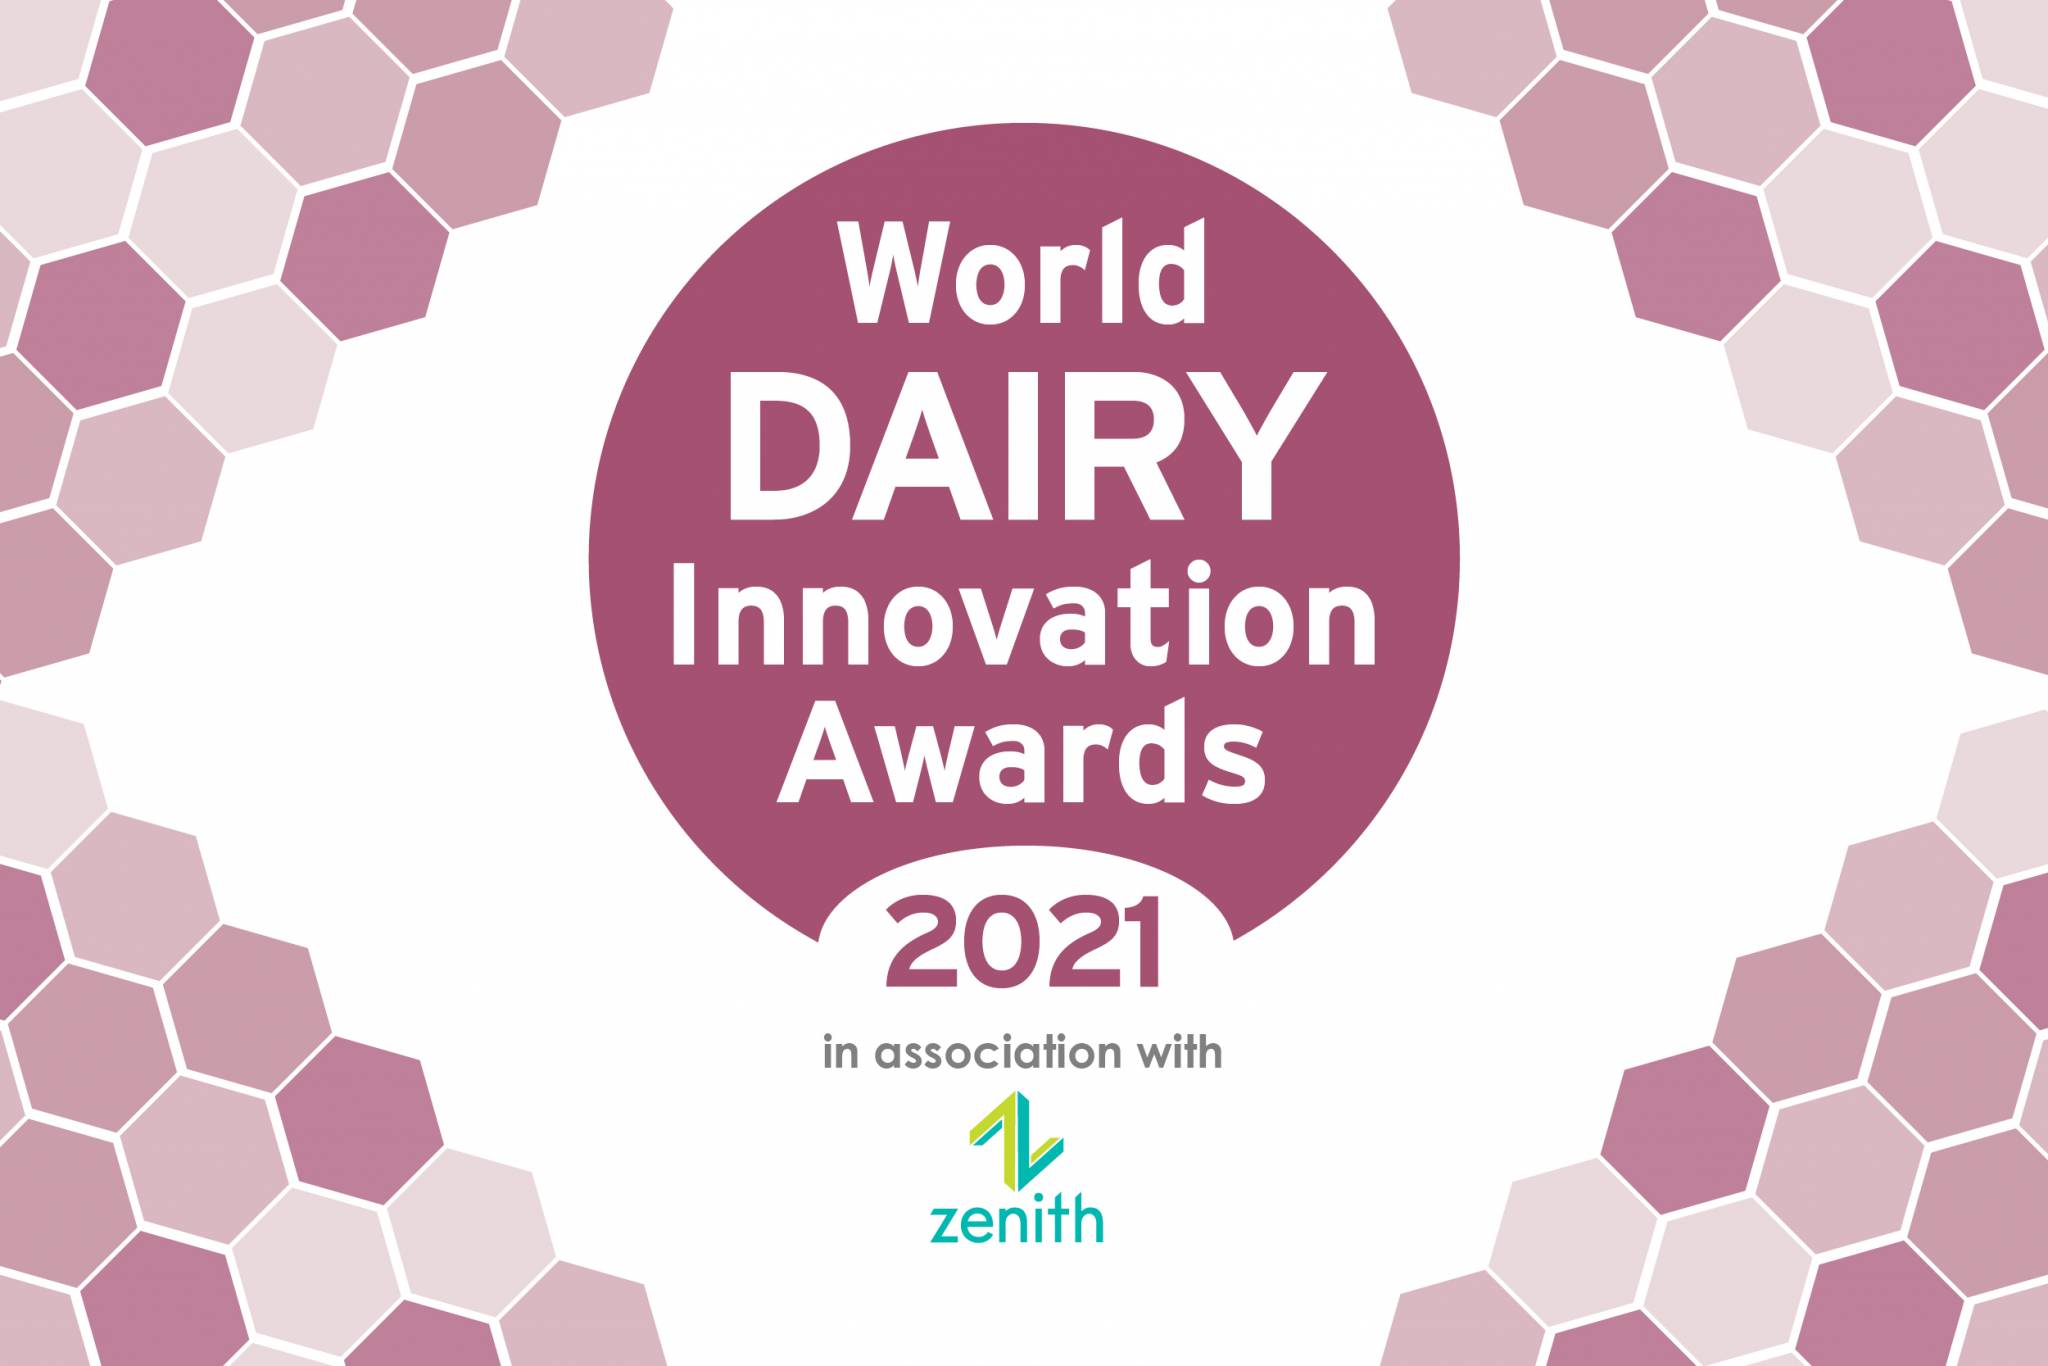 What are the World Dairy Innovation Awards judges expecting to see this year? (Part 1)